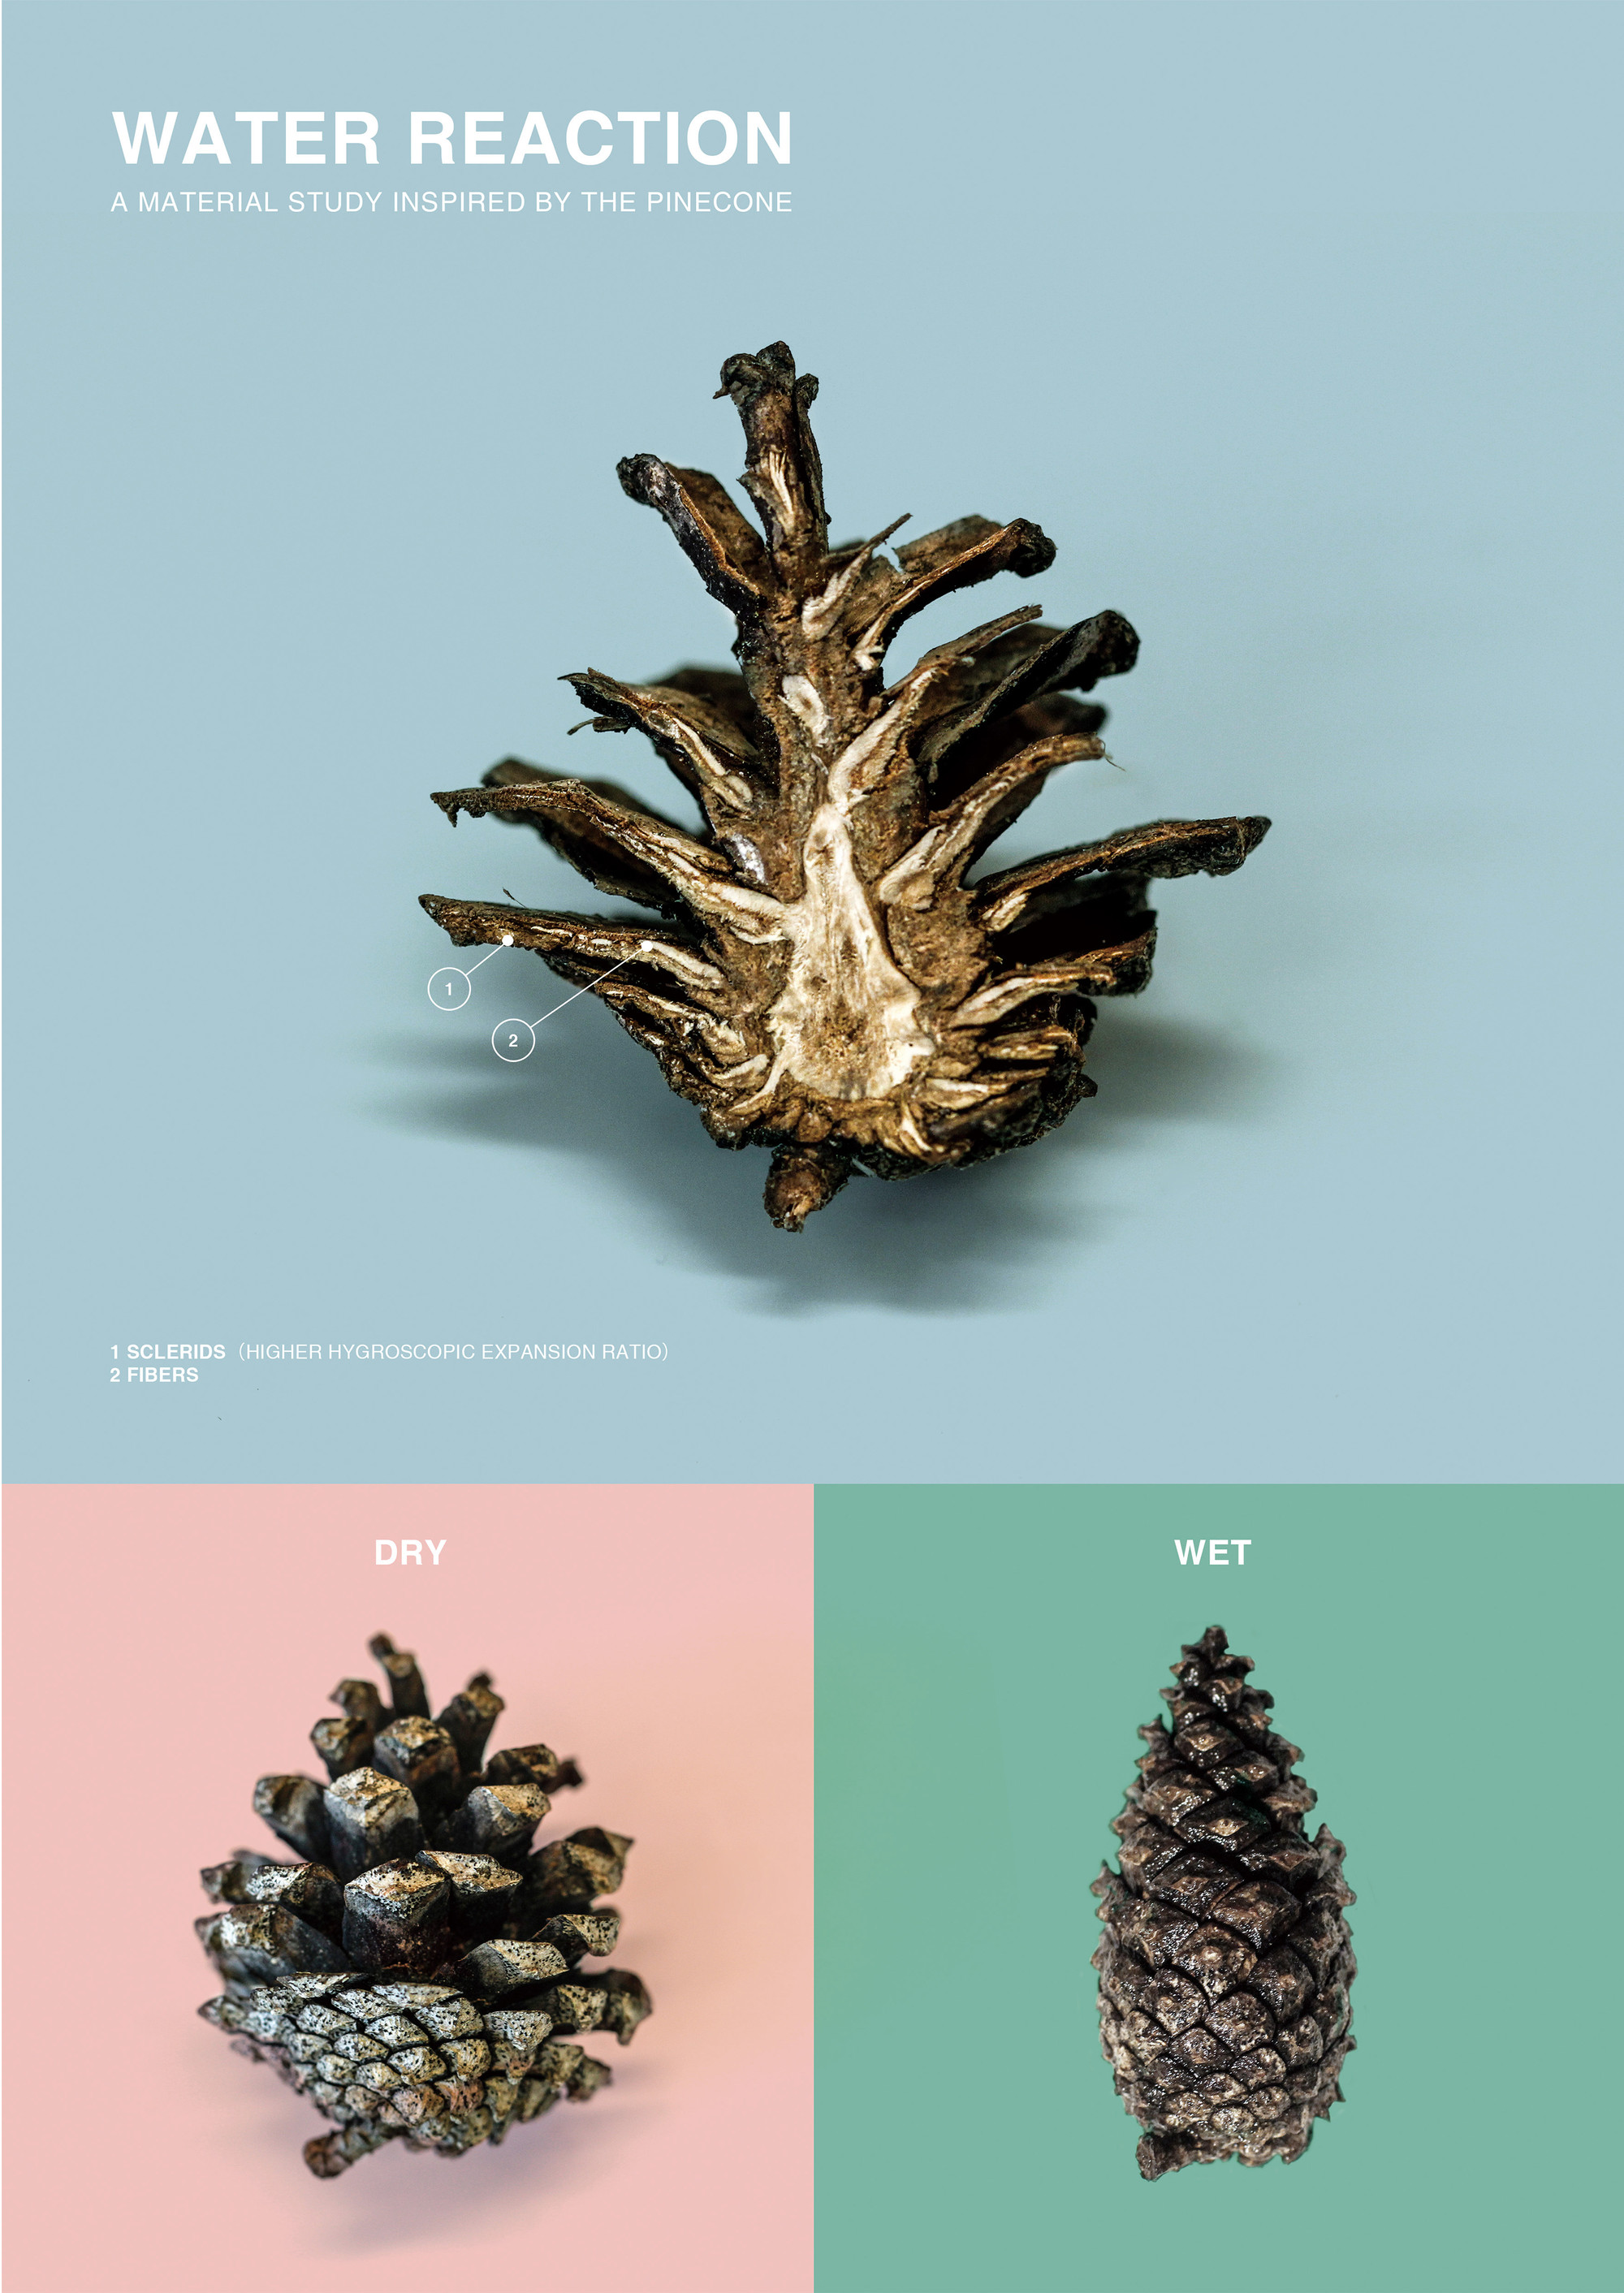 Building Elements Come Alive with this Pinecone-Inspired Material ...